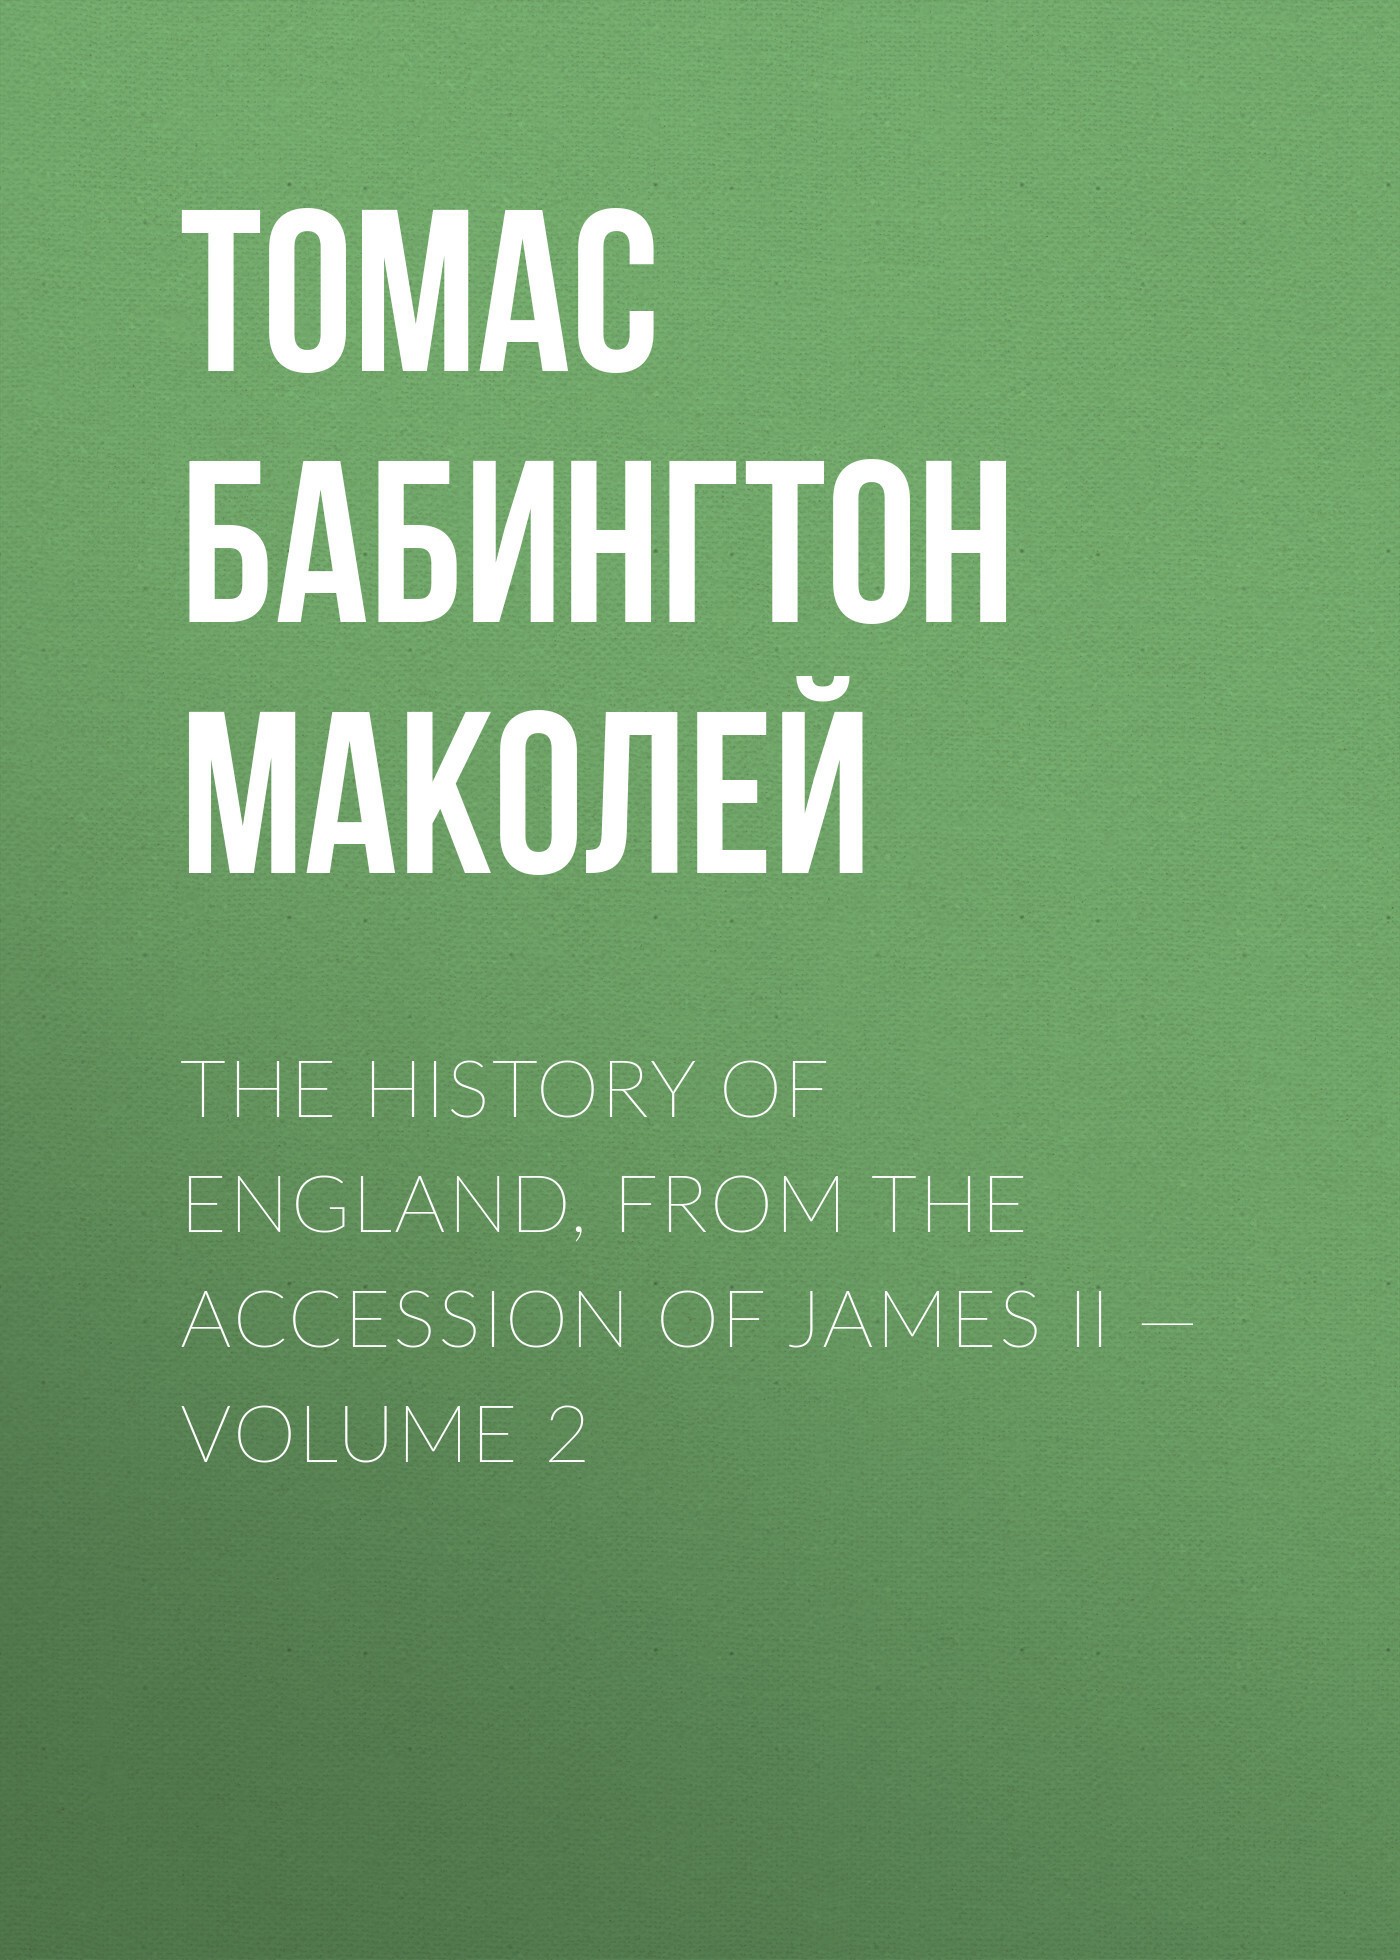 The History of England, from the Accession of James II— Volume 2